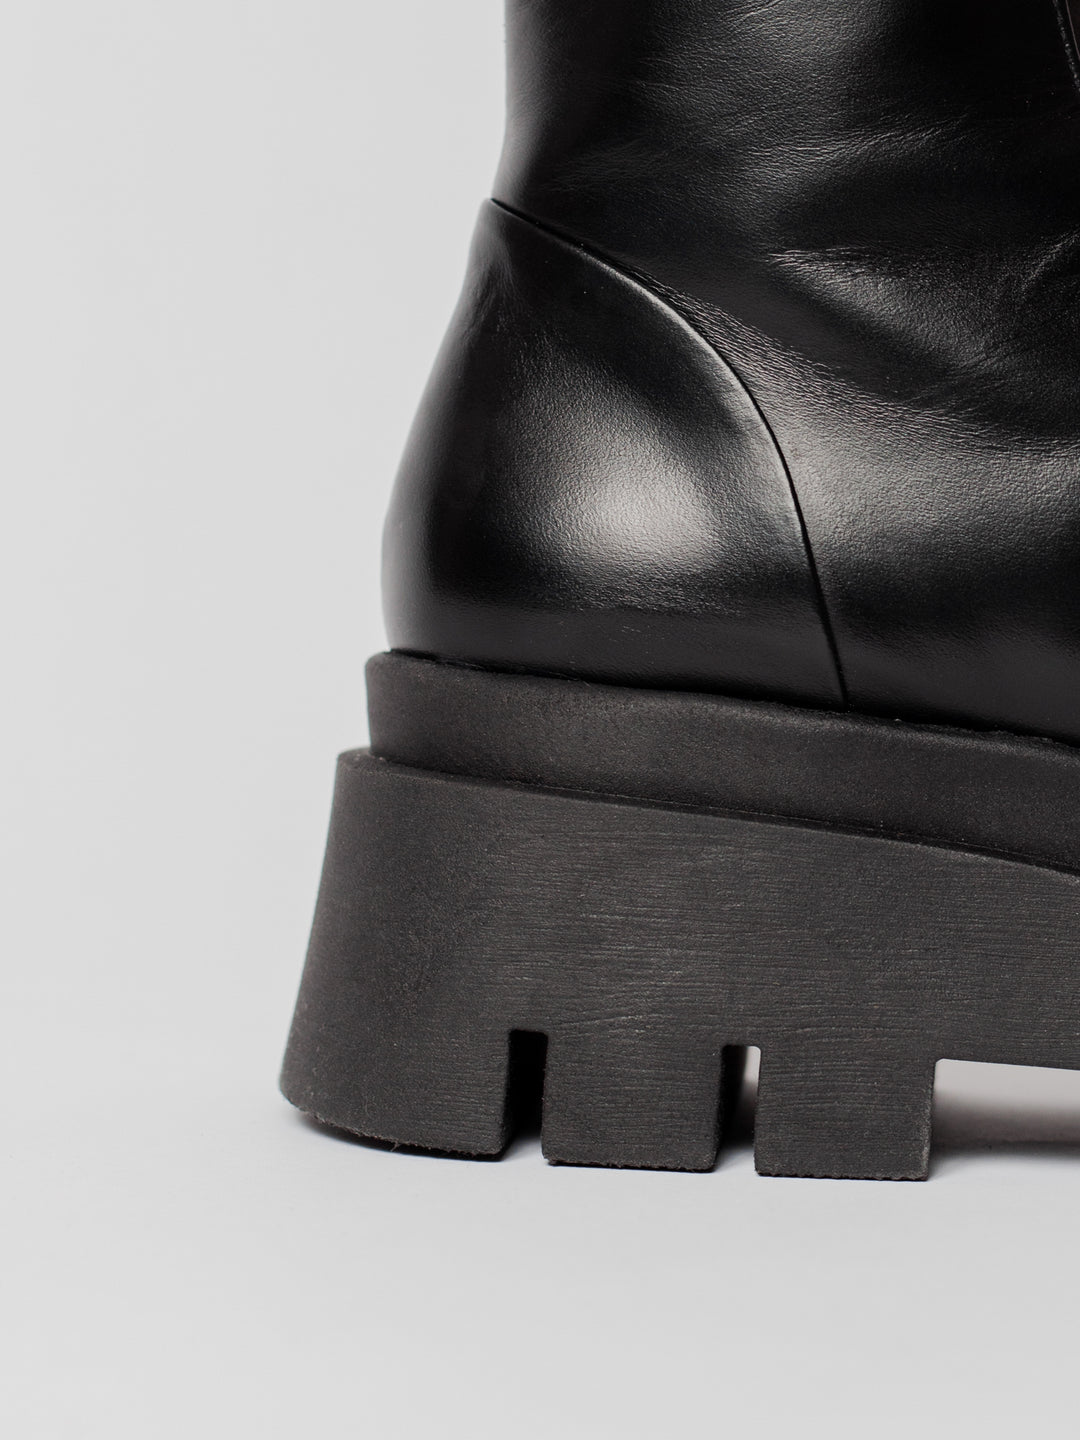 Blankens The Thilda. chunky sole, zipper in front. black leather. detail photo of chunky sole